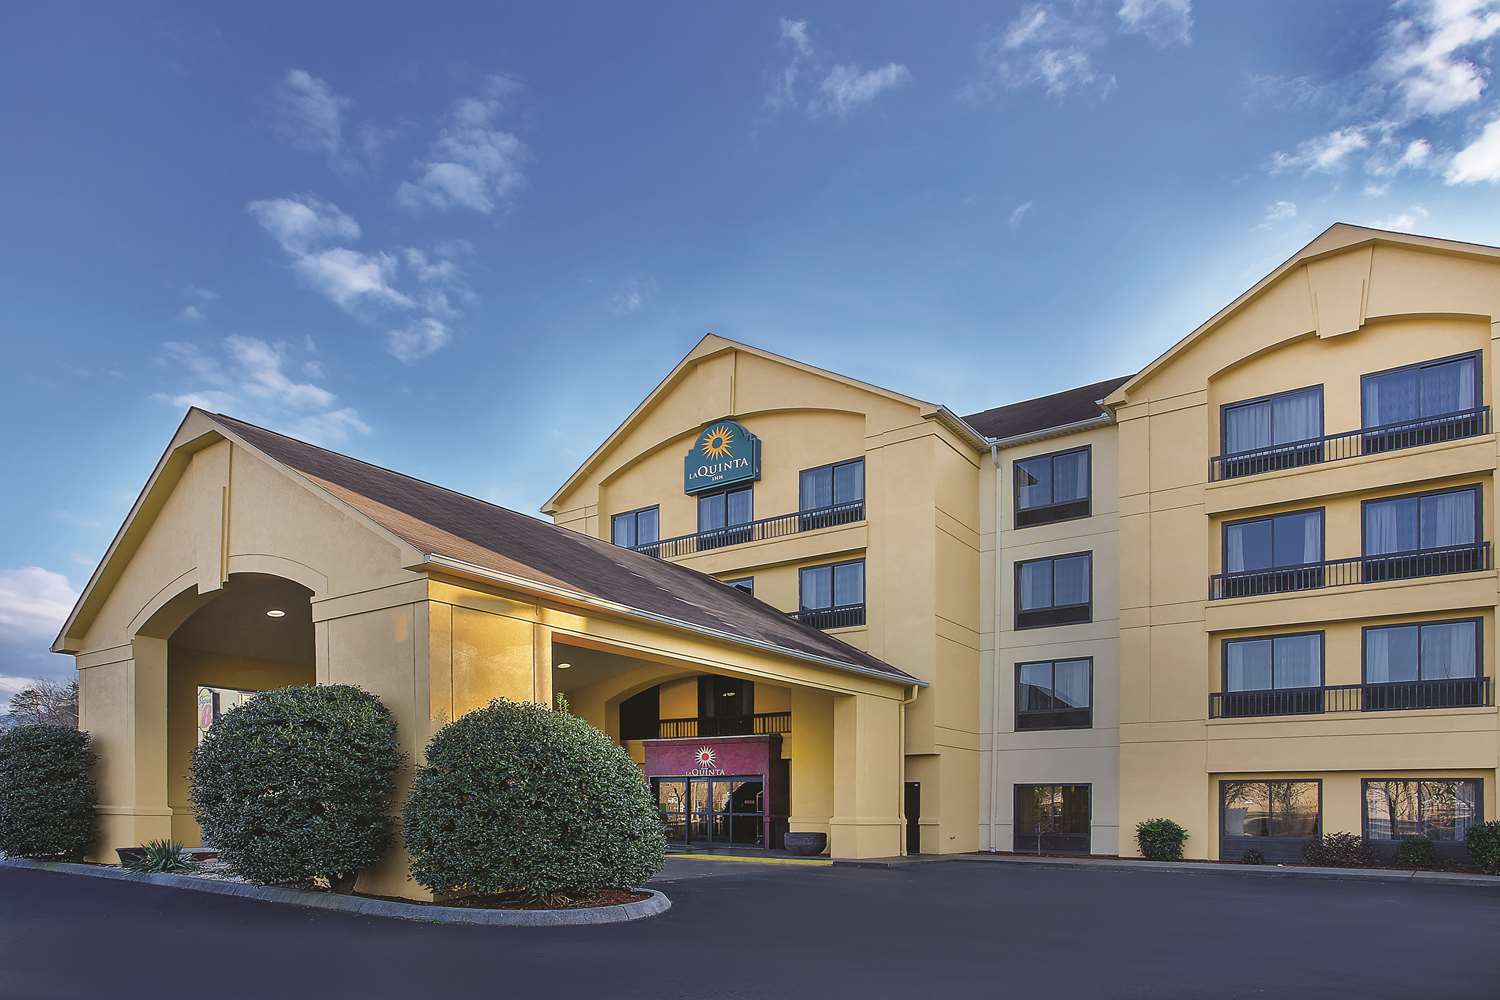 Pet Friendly La Quinta Inn Pigeon Forge-Dollywood in Pigeon Forge, Tennessee